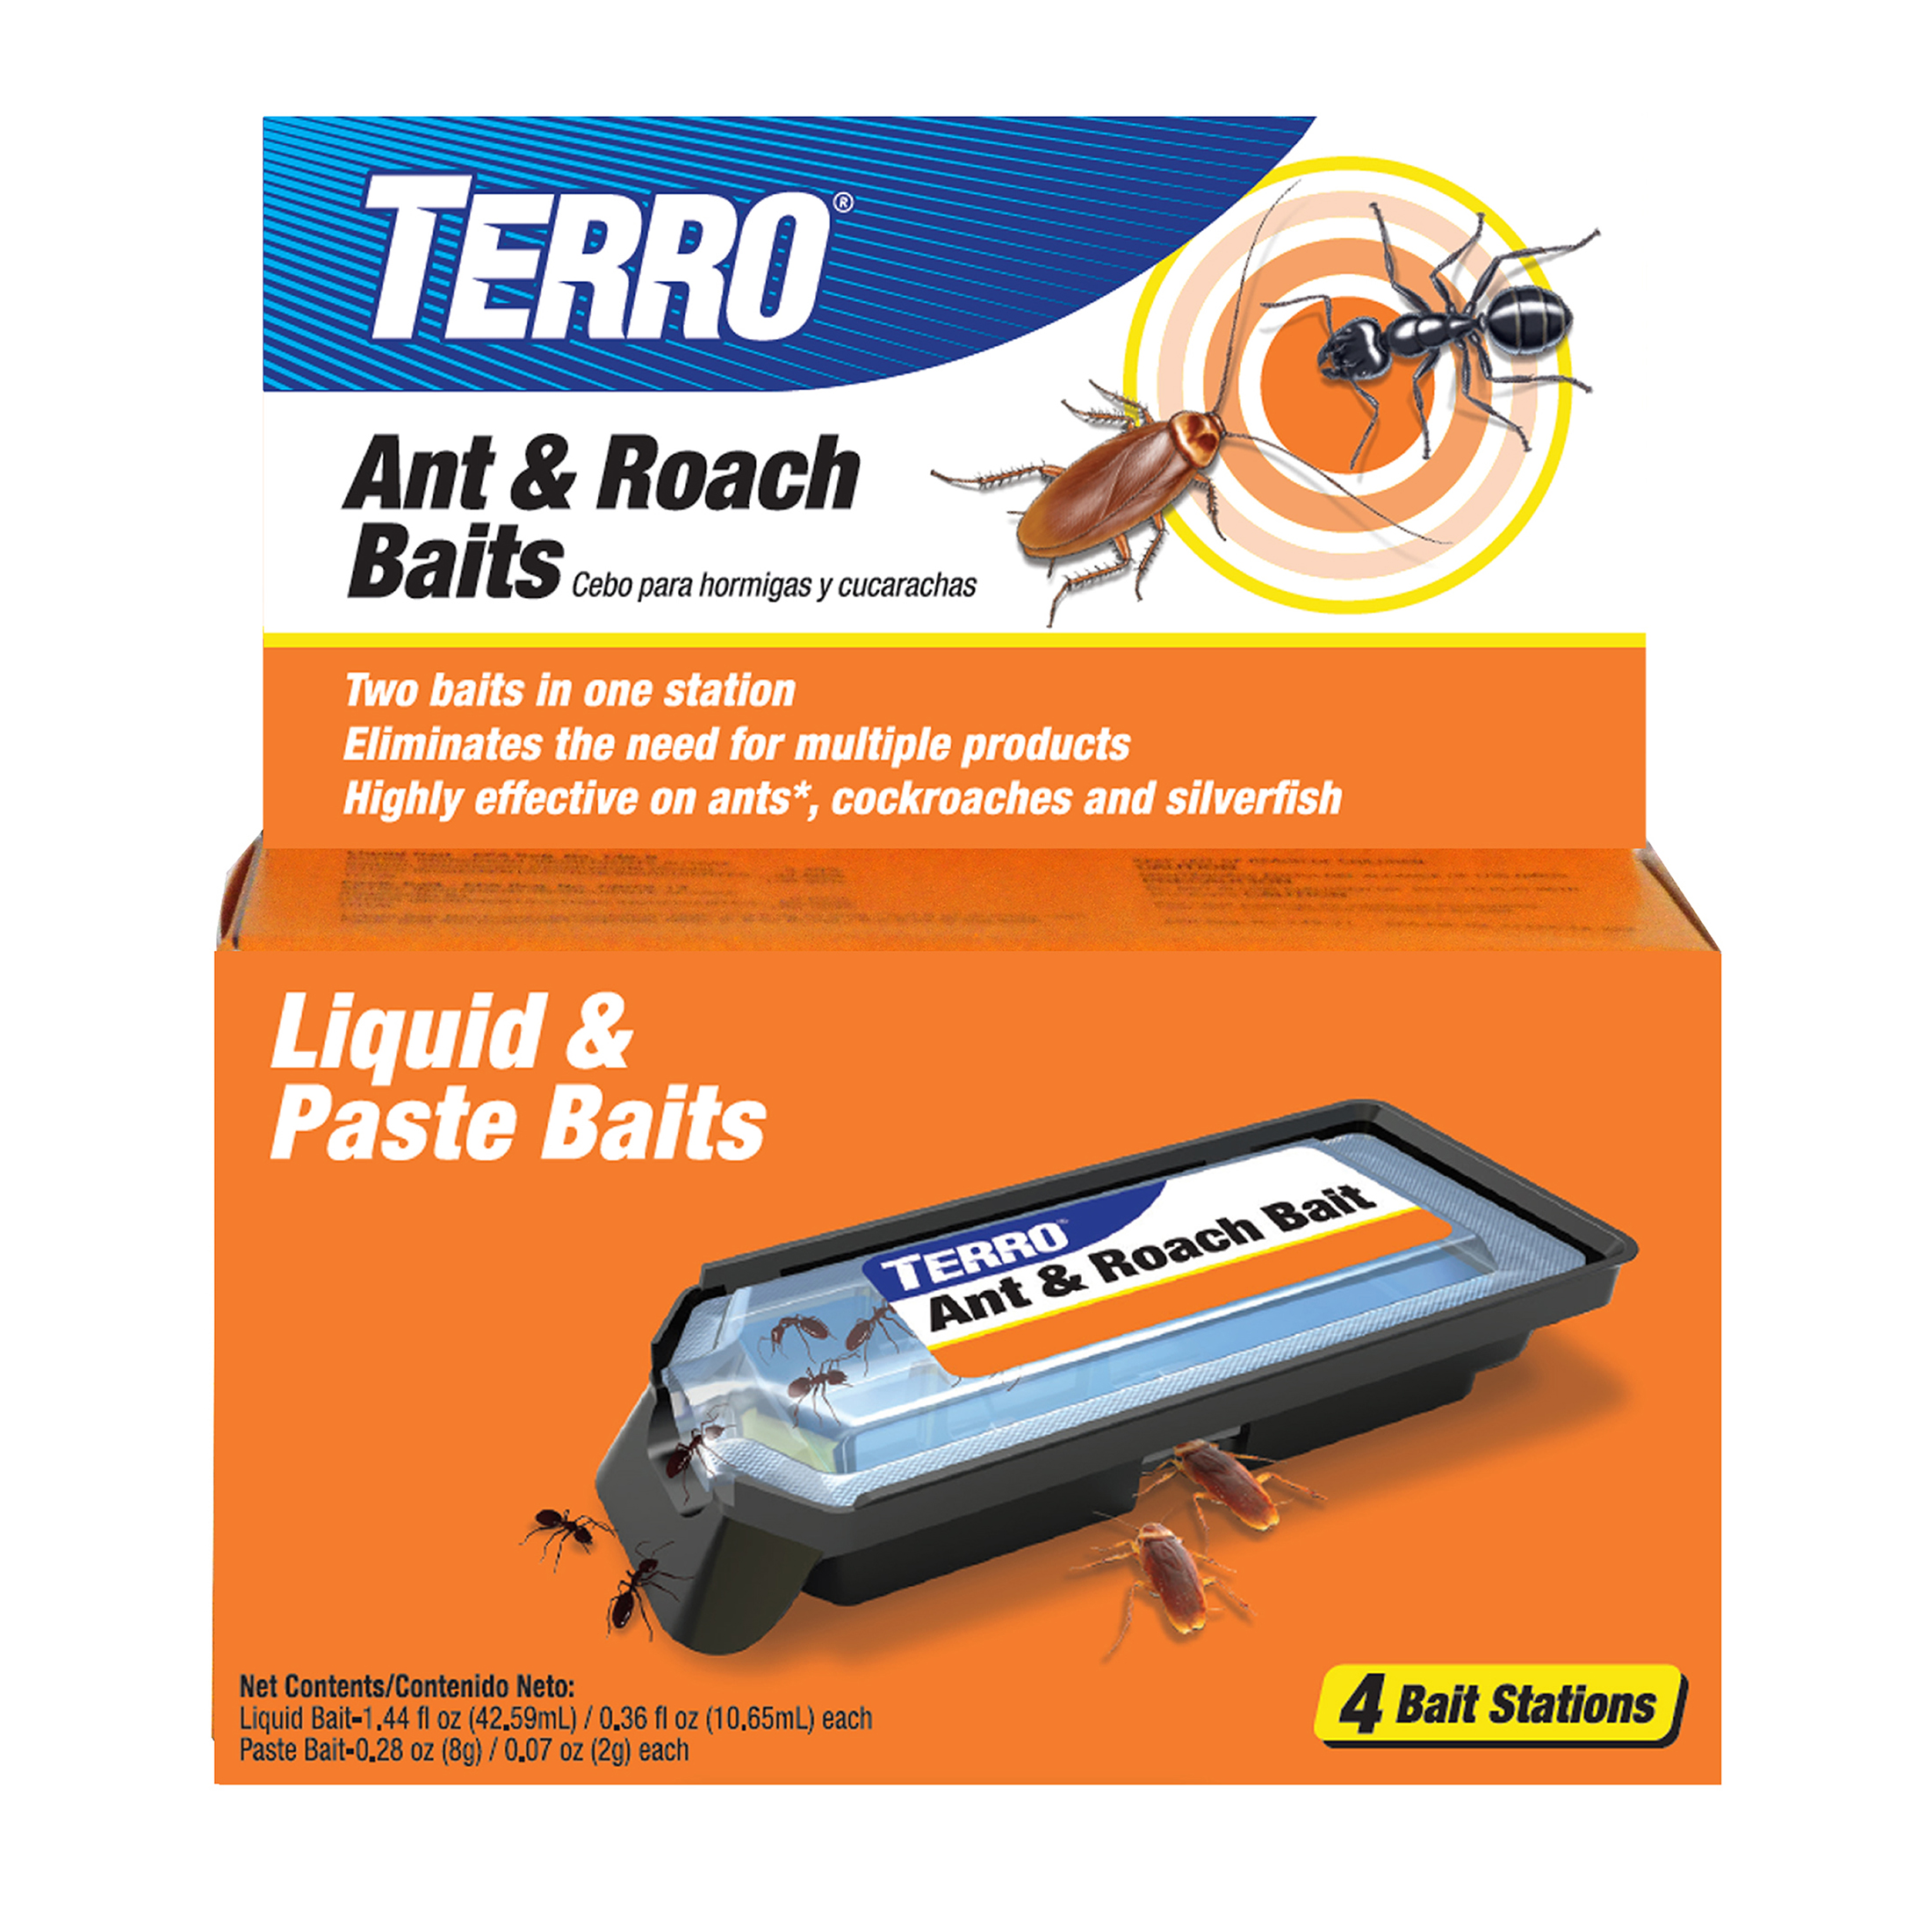 TERRO Ant and Roach Baits - image 1 of 9